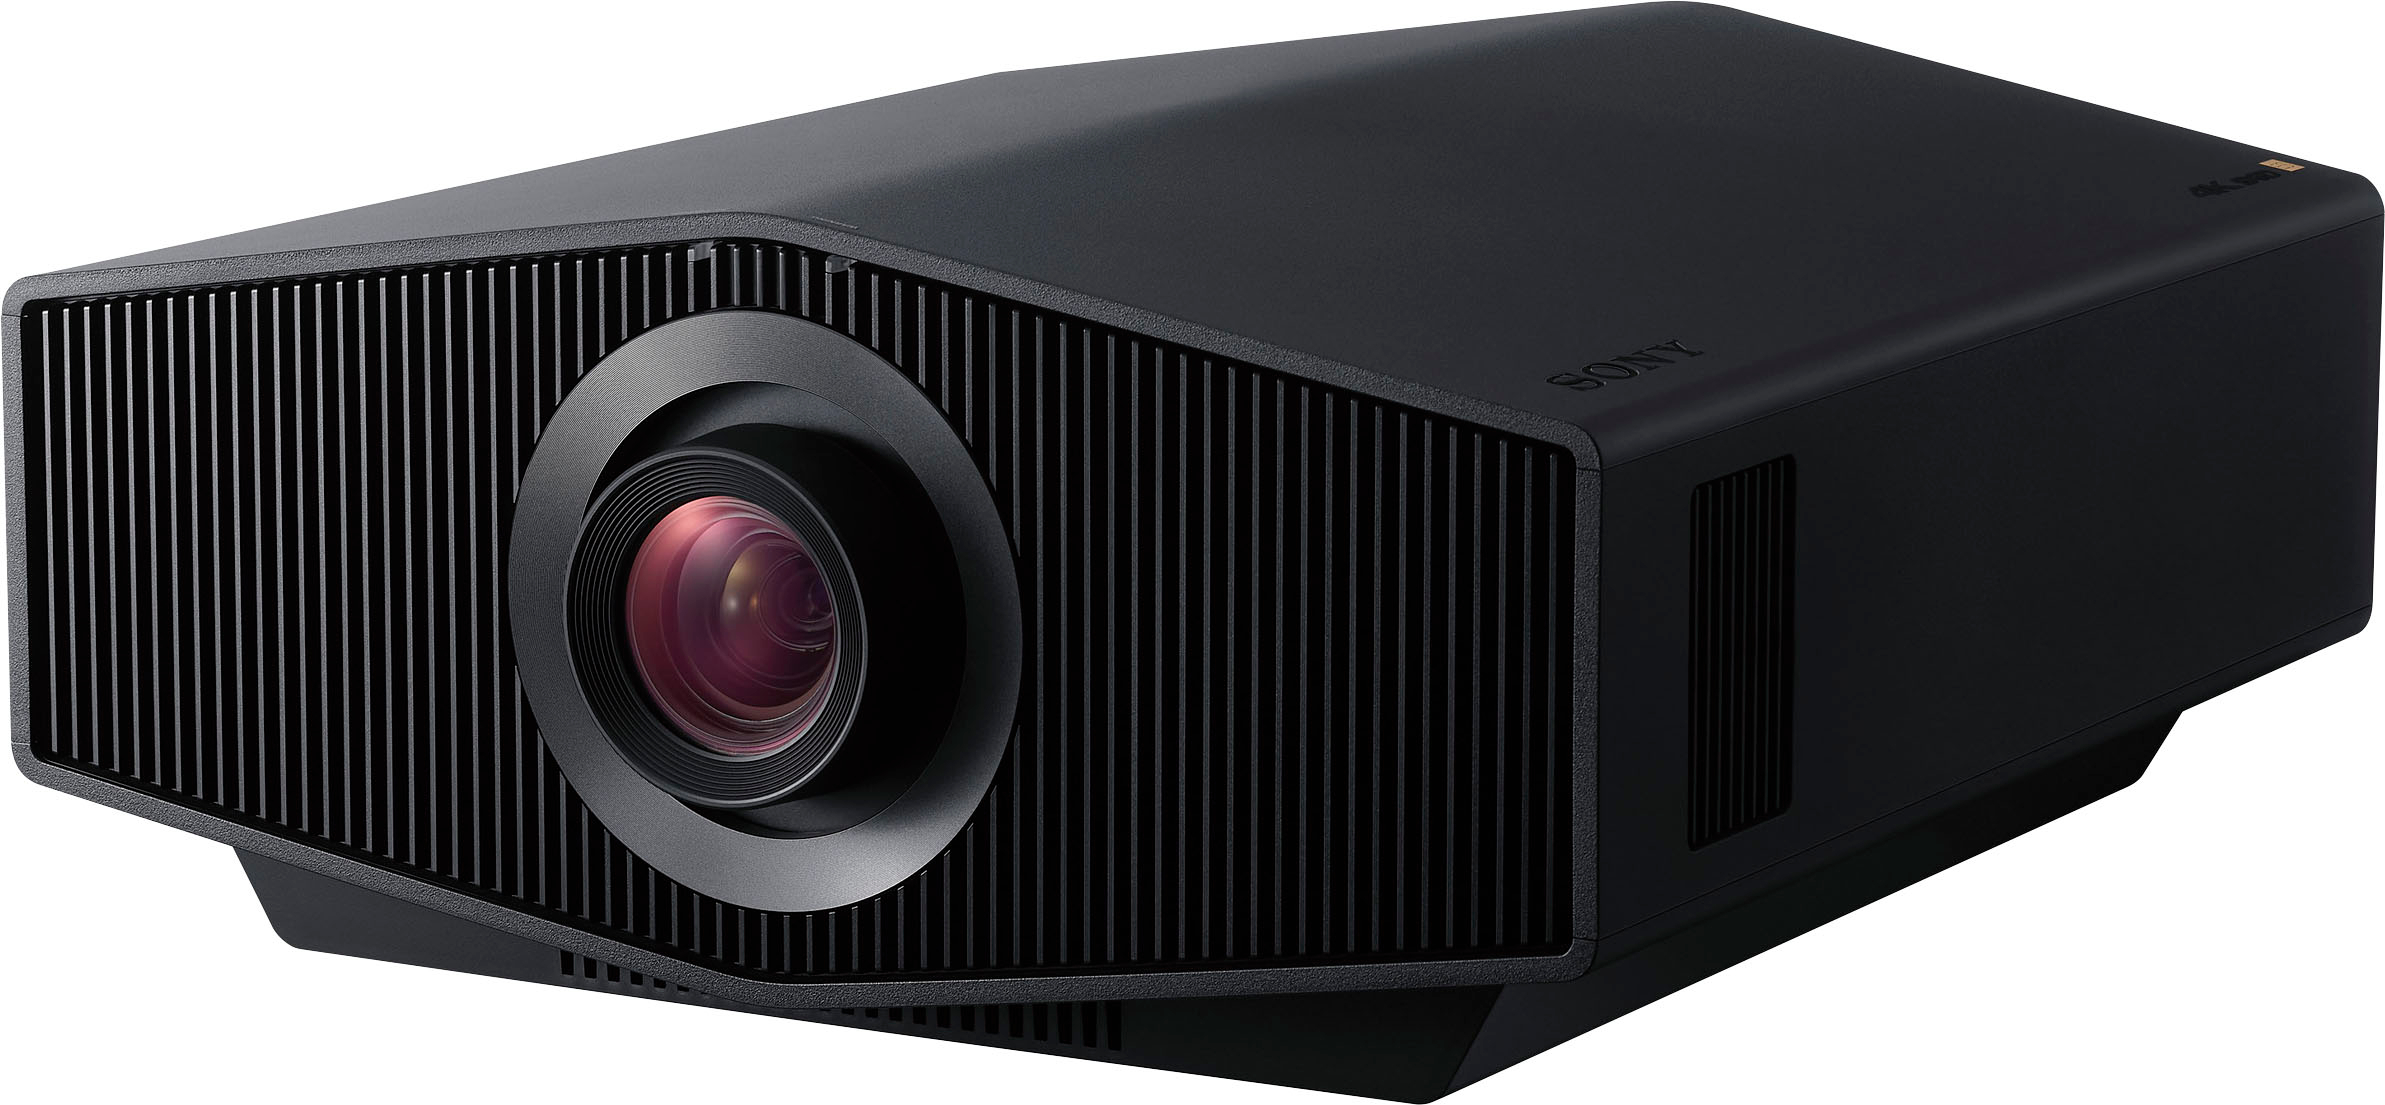 Angle View: Sony - VPLXW6000ES 4K HDR Laser Home Theater Projector with Native 4K SXRD Panel - Black